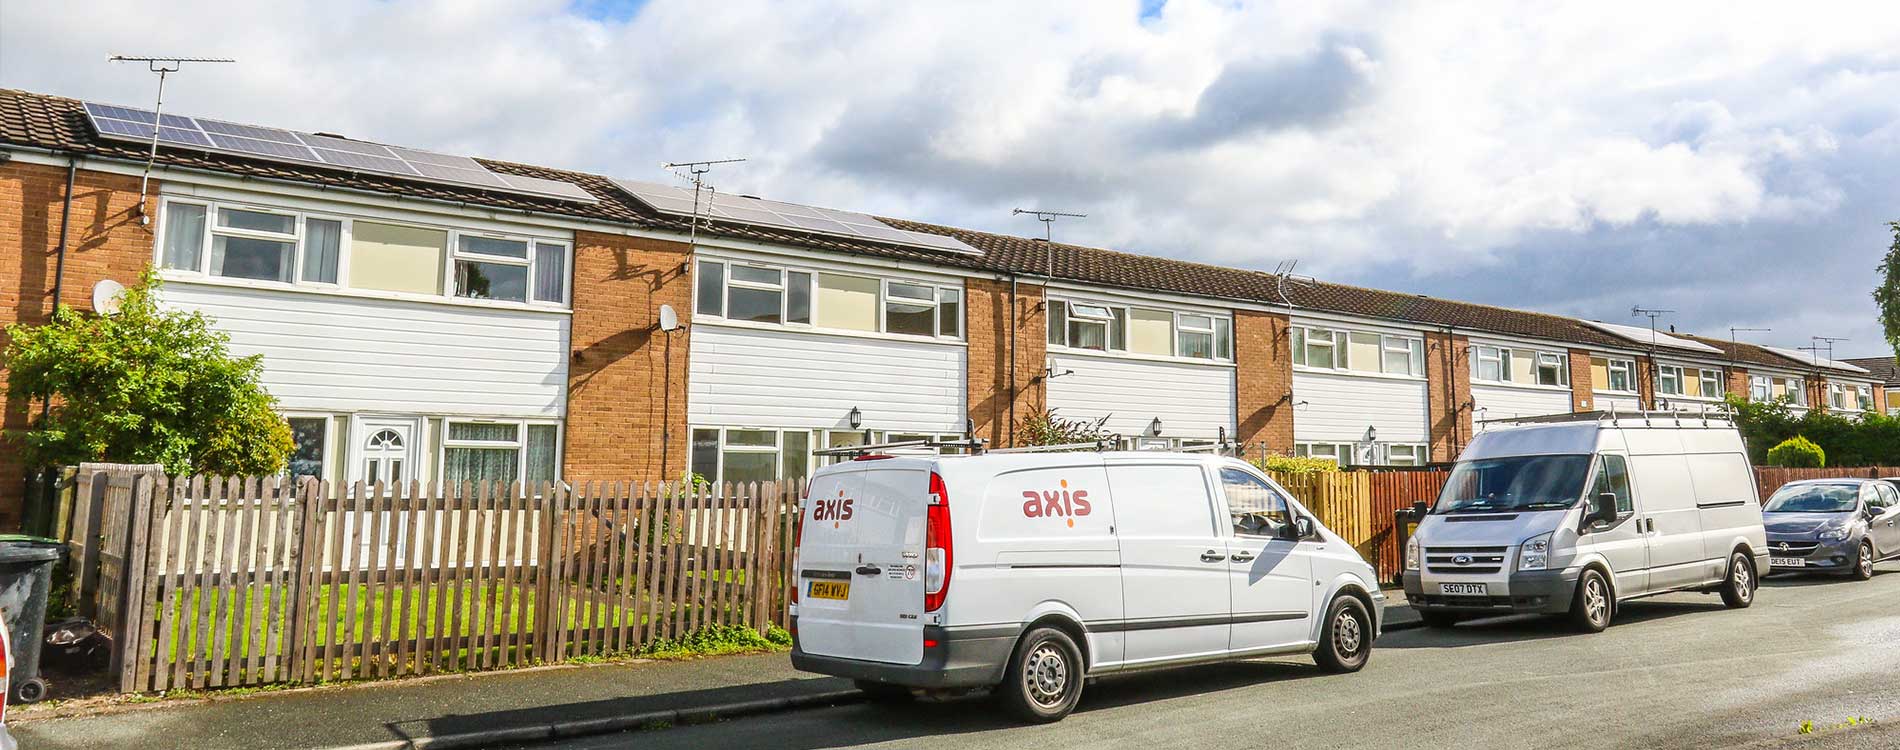 Axis Van on a street outside a property in wrexham that is serviced by axis